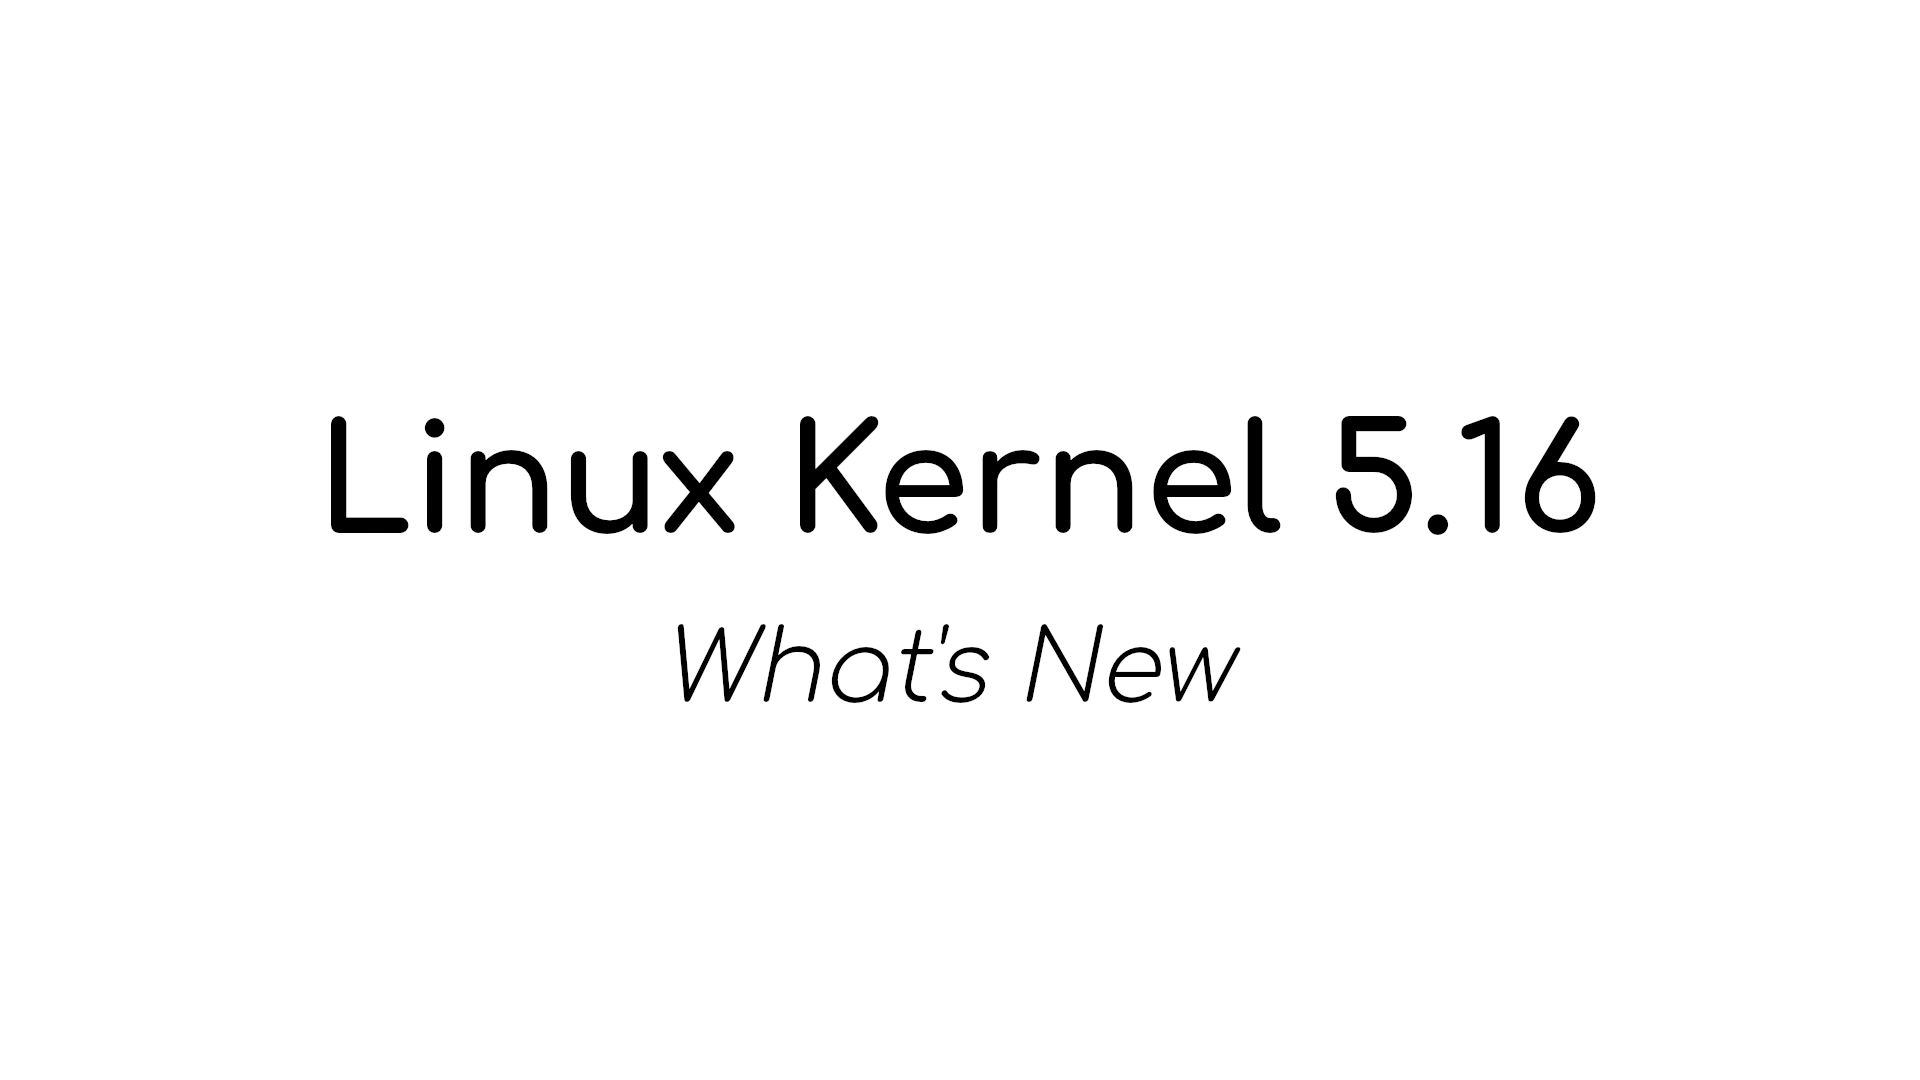 Linux Kernel 5.16 Officially Released, This Is What’s New